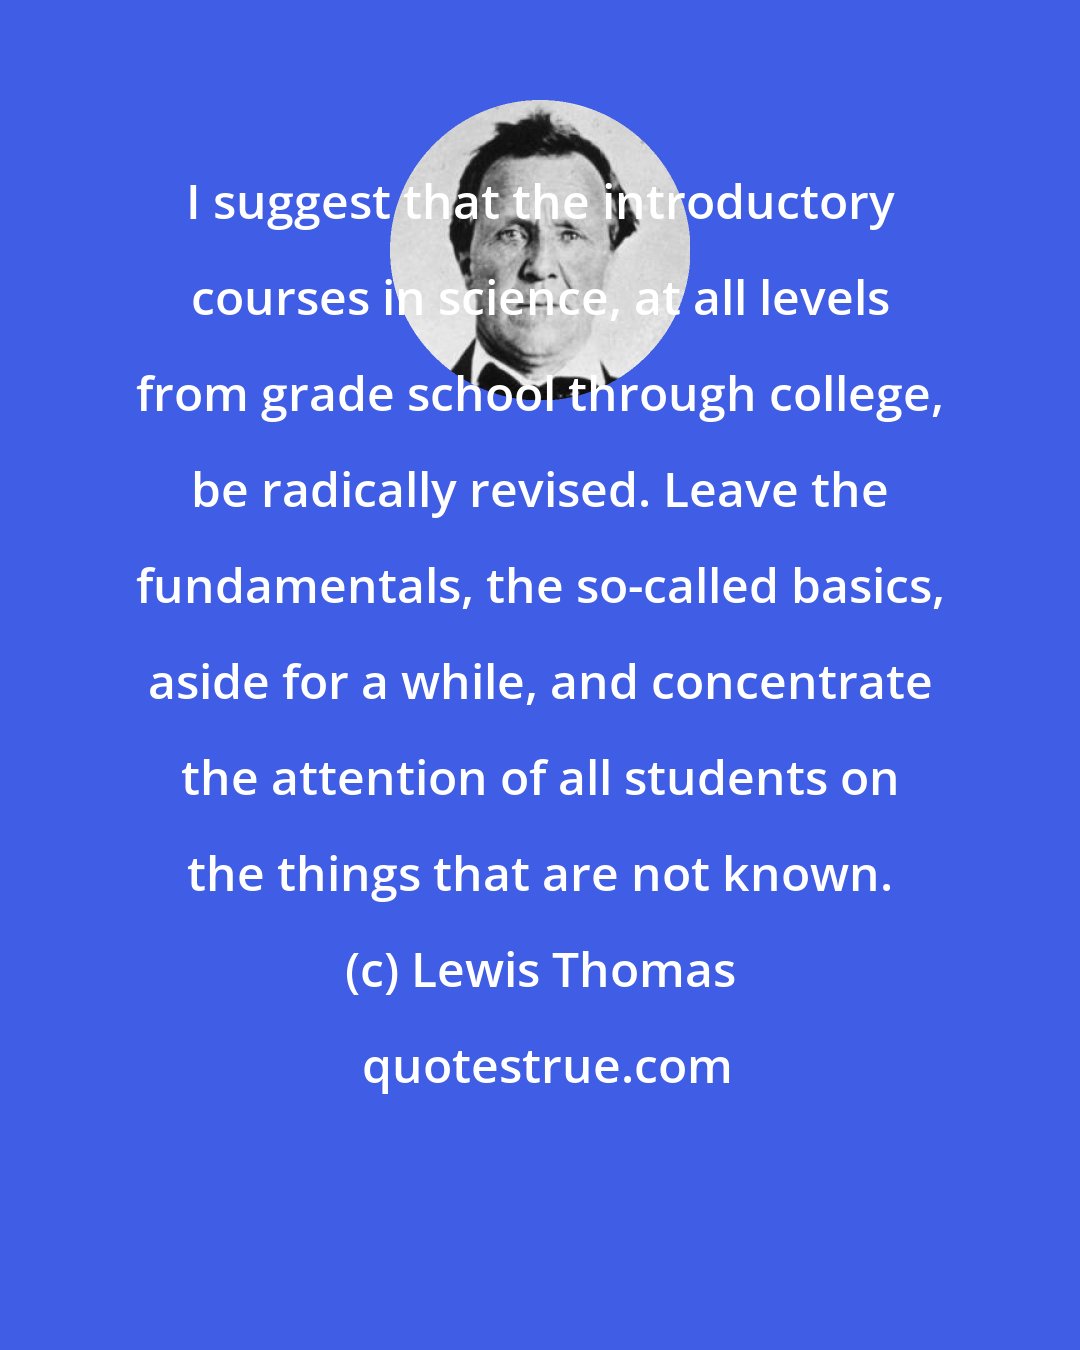 Lewis Thomas: I suggest that the introductory courses in science, at all levels from grade school through college, be radically revised. Leave the fundamentals, the so-called basics, aside for a while, and concentrate the attention of all students on the things that are not known.